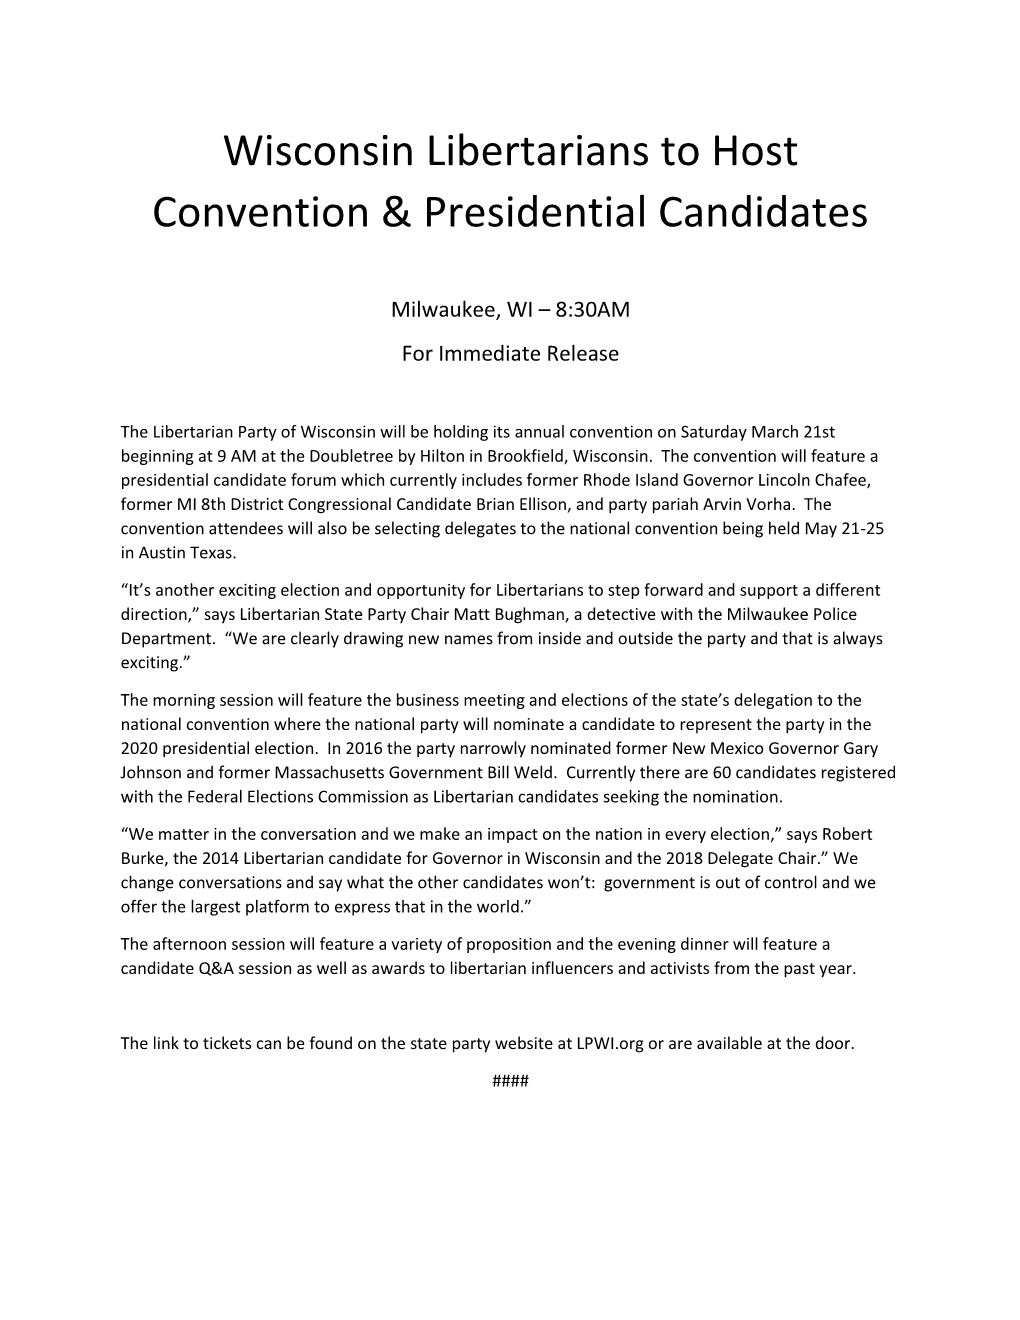 Wisconsin Libertarians to Host Convention & Presidential